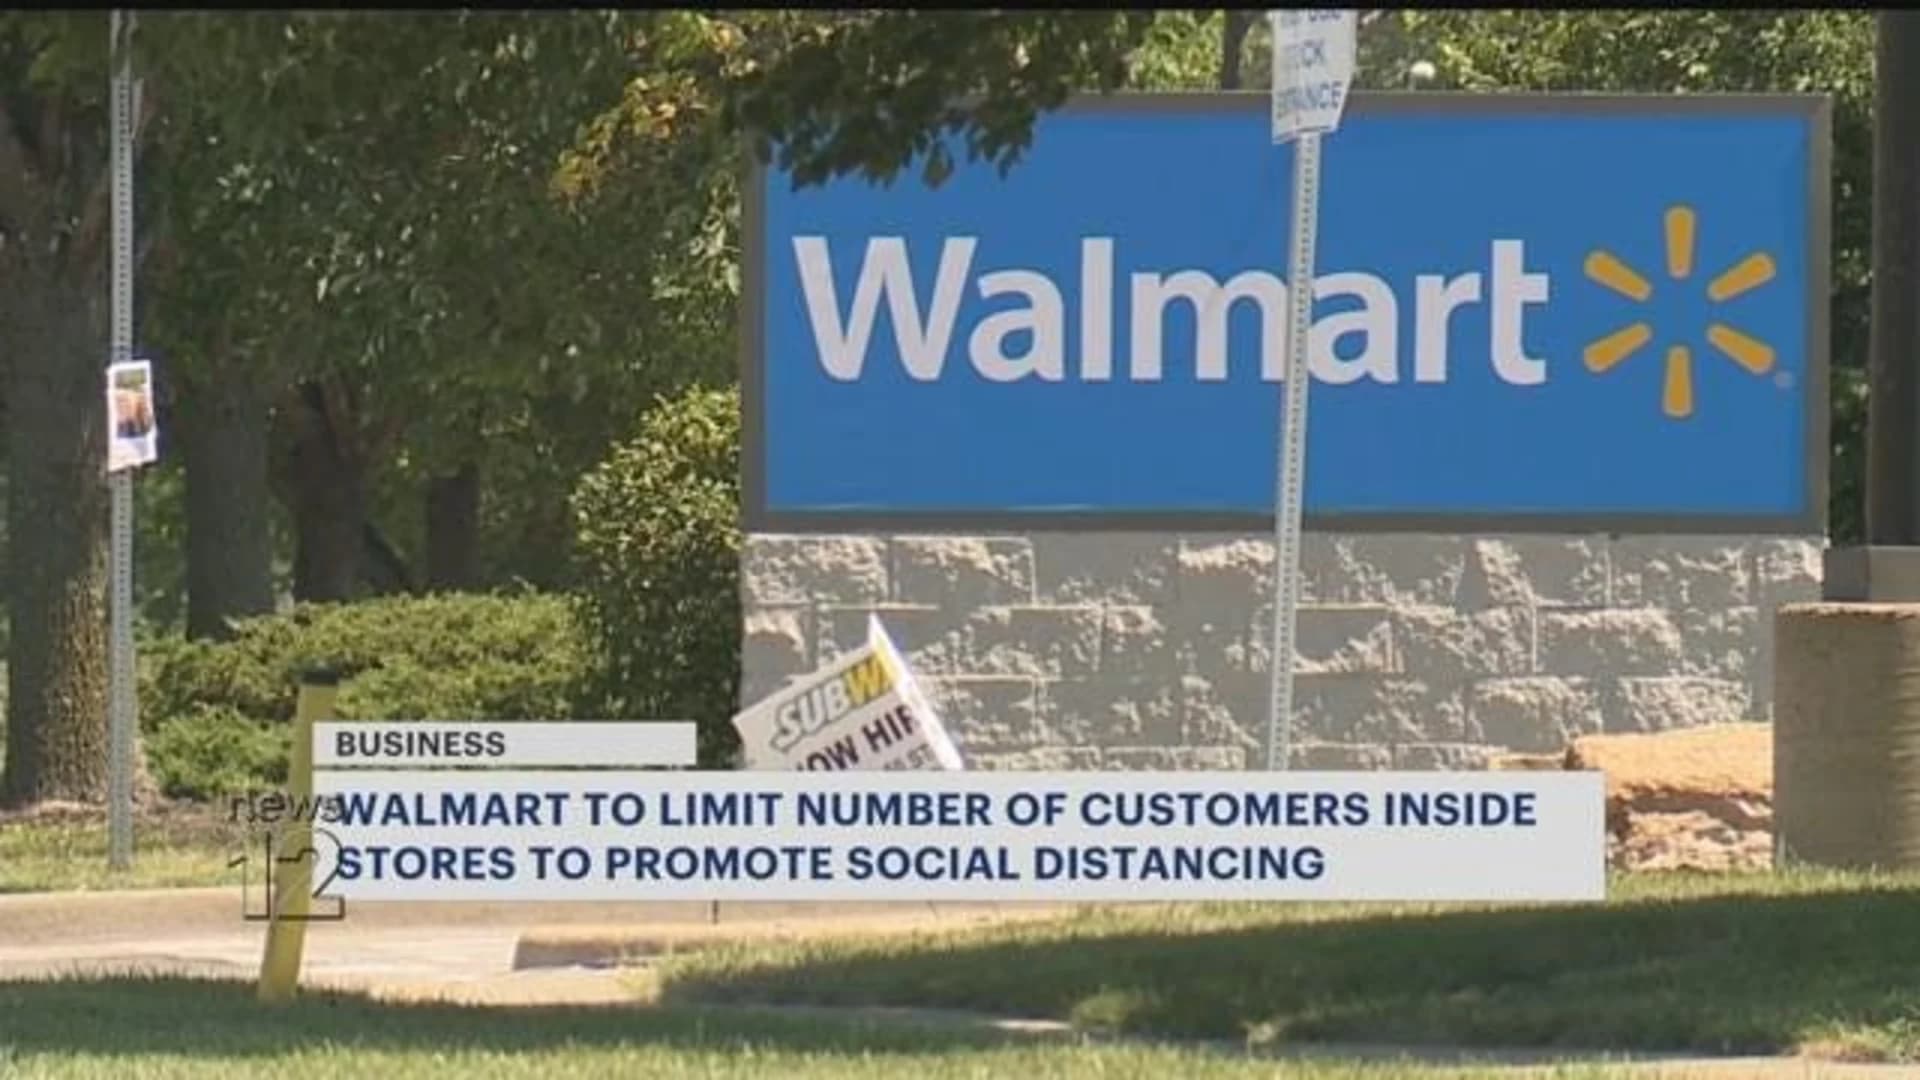 Crowd control: Walmart limiting amount of shoppers in stores